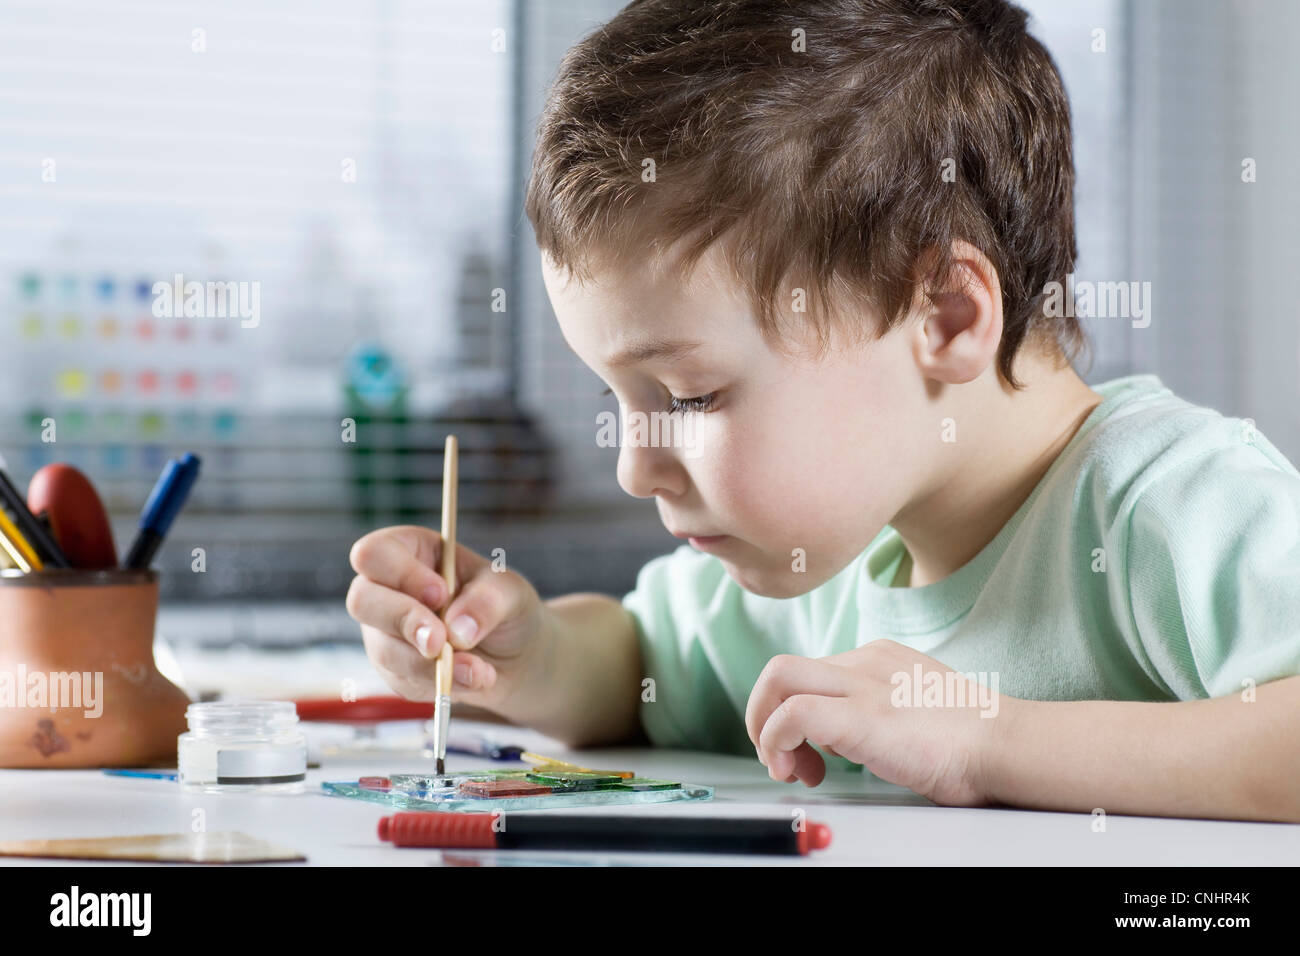 Boy Painting in workshop Stock Photo